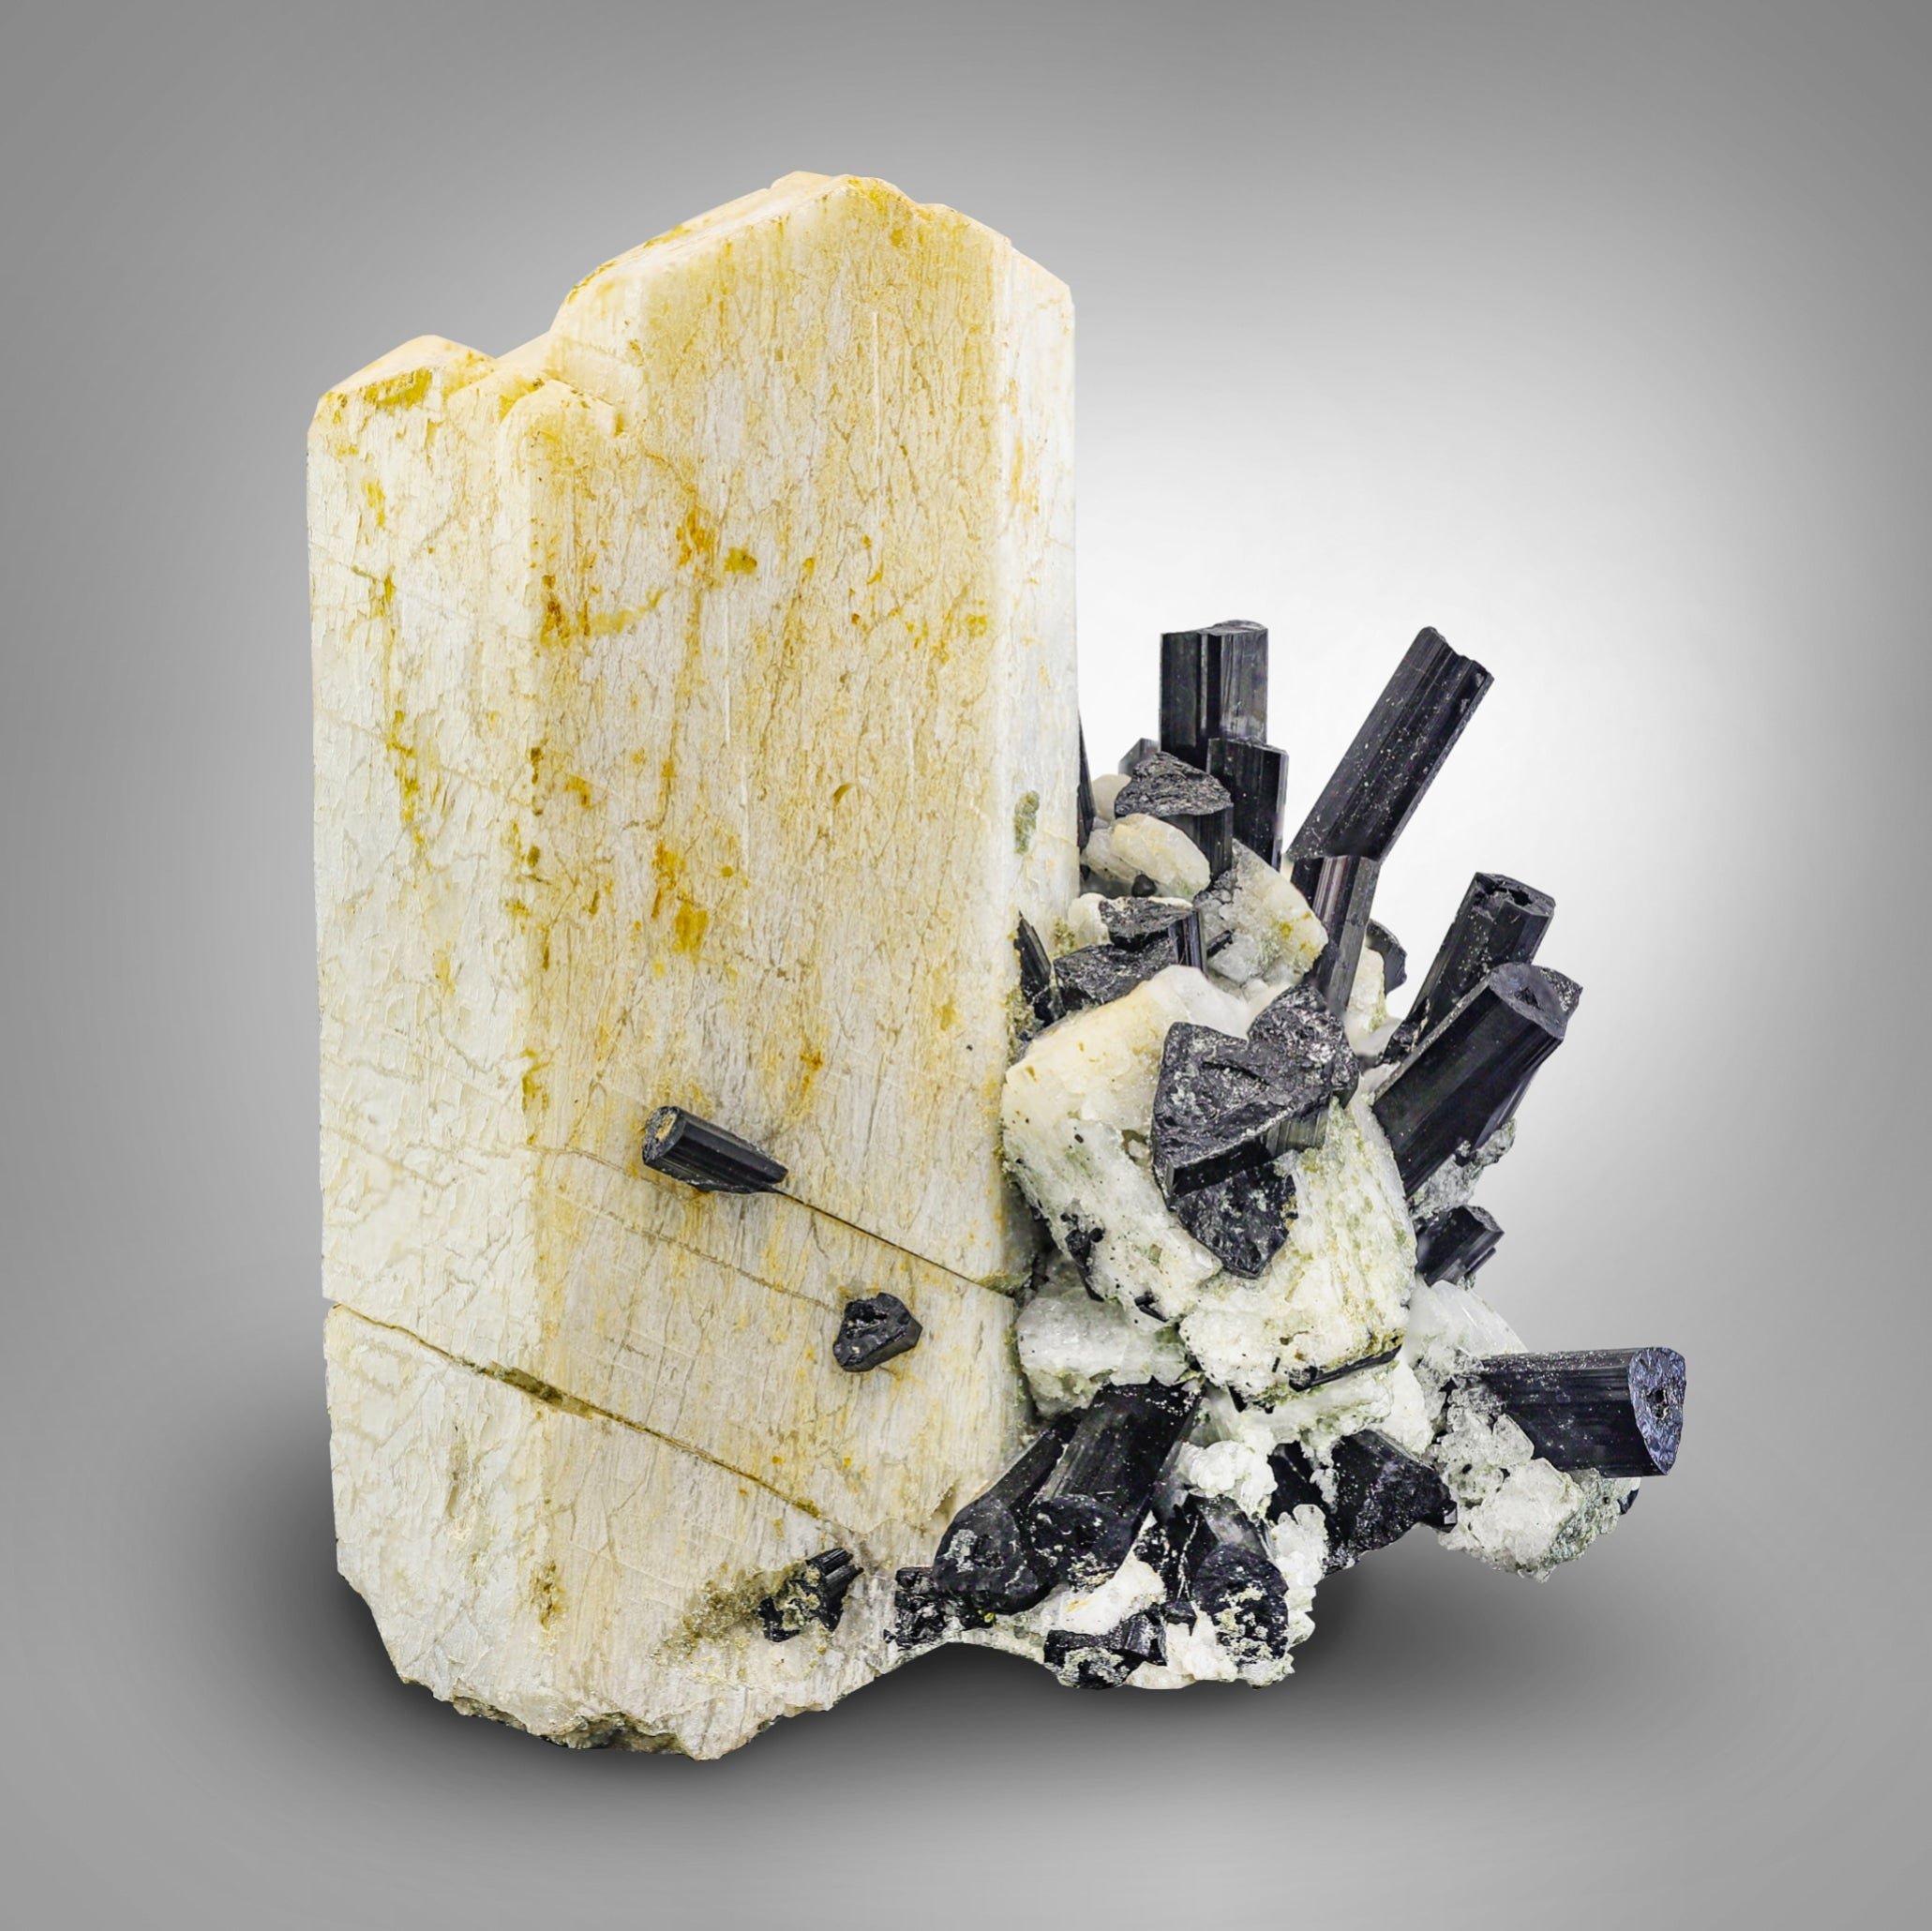 Off-White Creamy Microcline Feldspar with Schorl Crystals from Pakistan